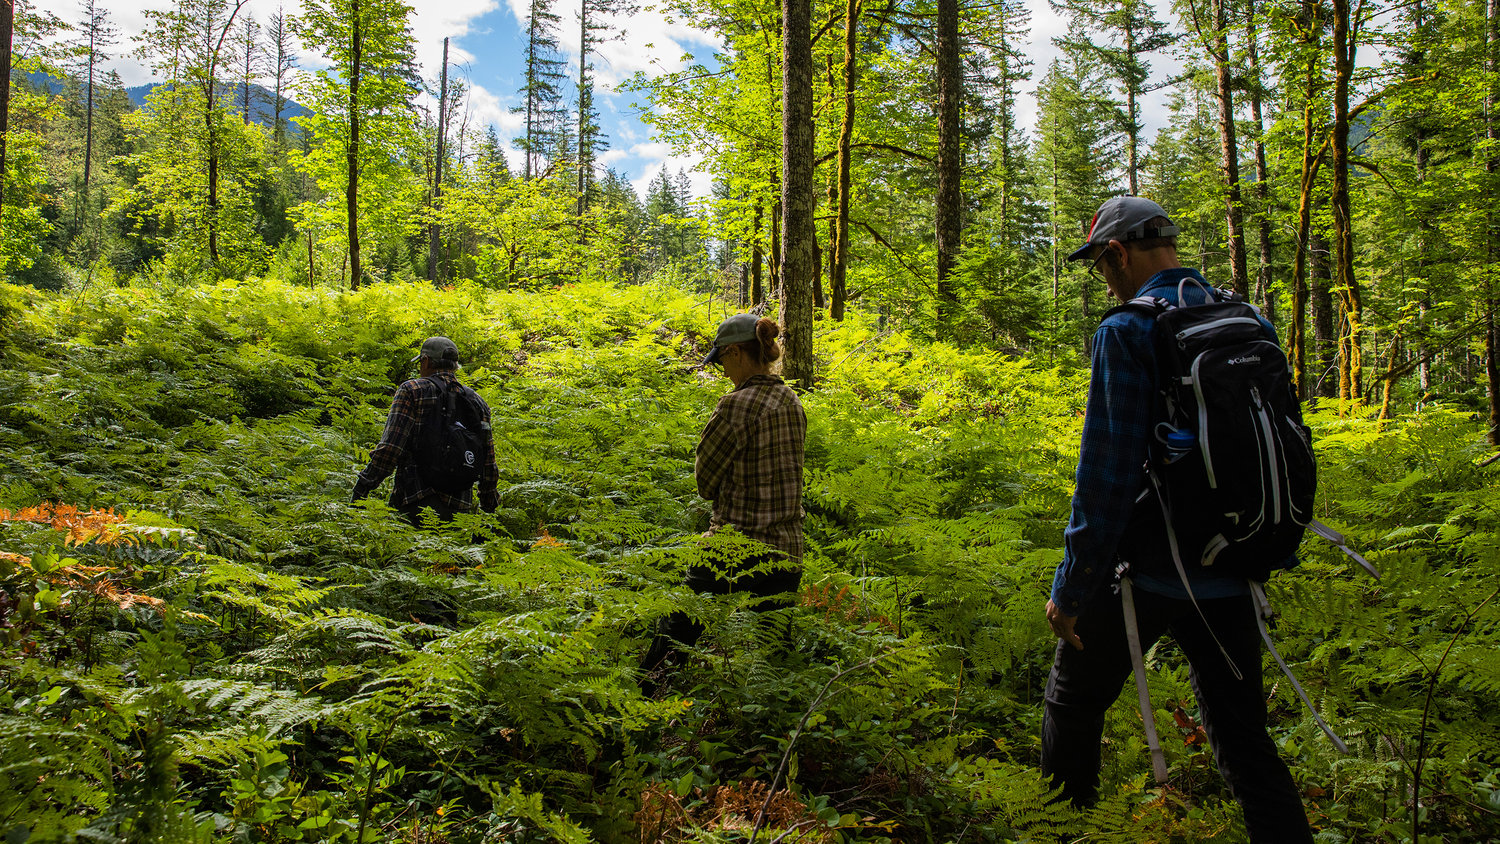 Jeff Green, Kim Freeman and Brian Yellin, all of Portland, trek through the Gifford Pinchot National Forest in Lewis County in search of a game camera Saturday morning.